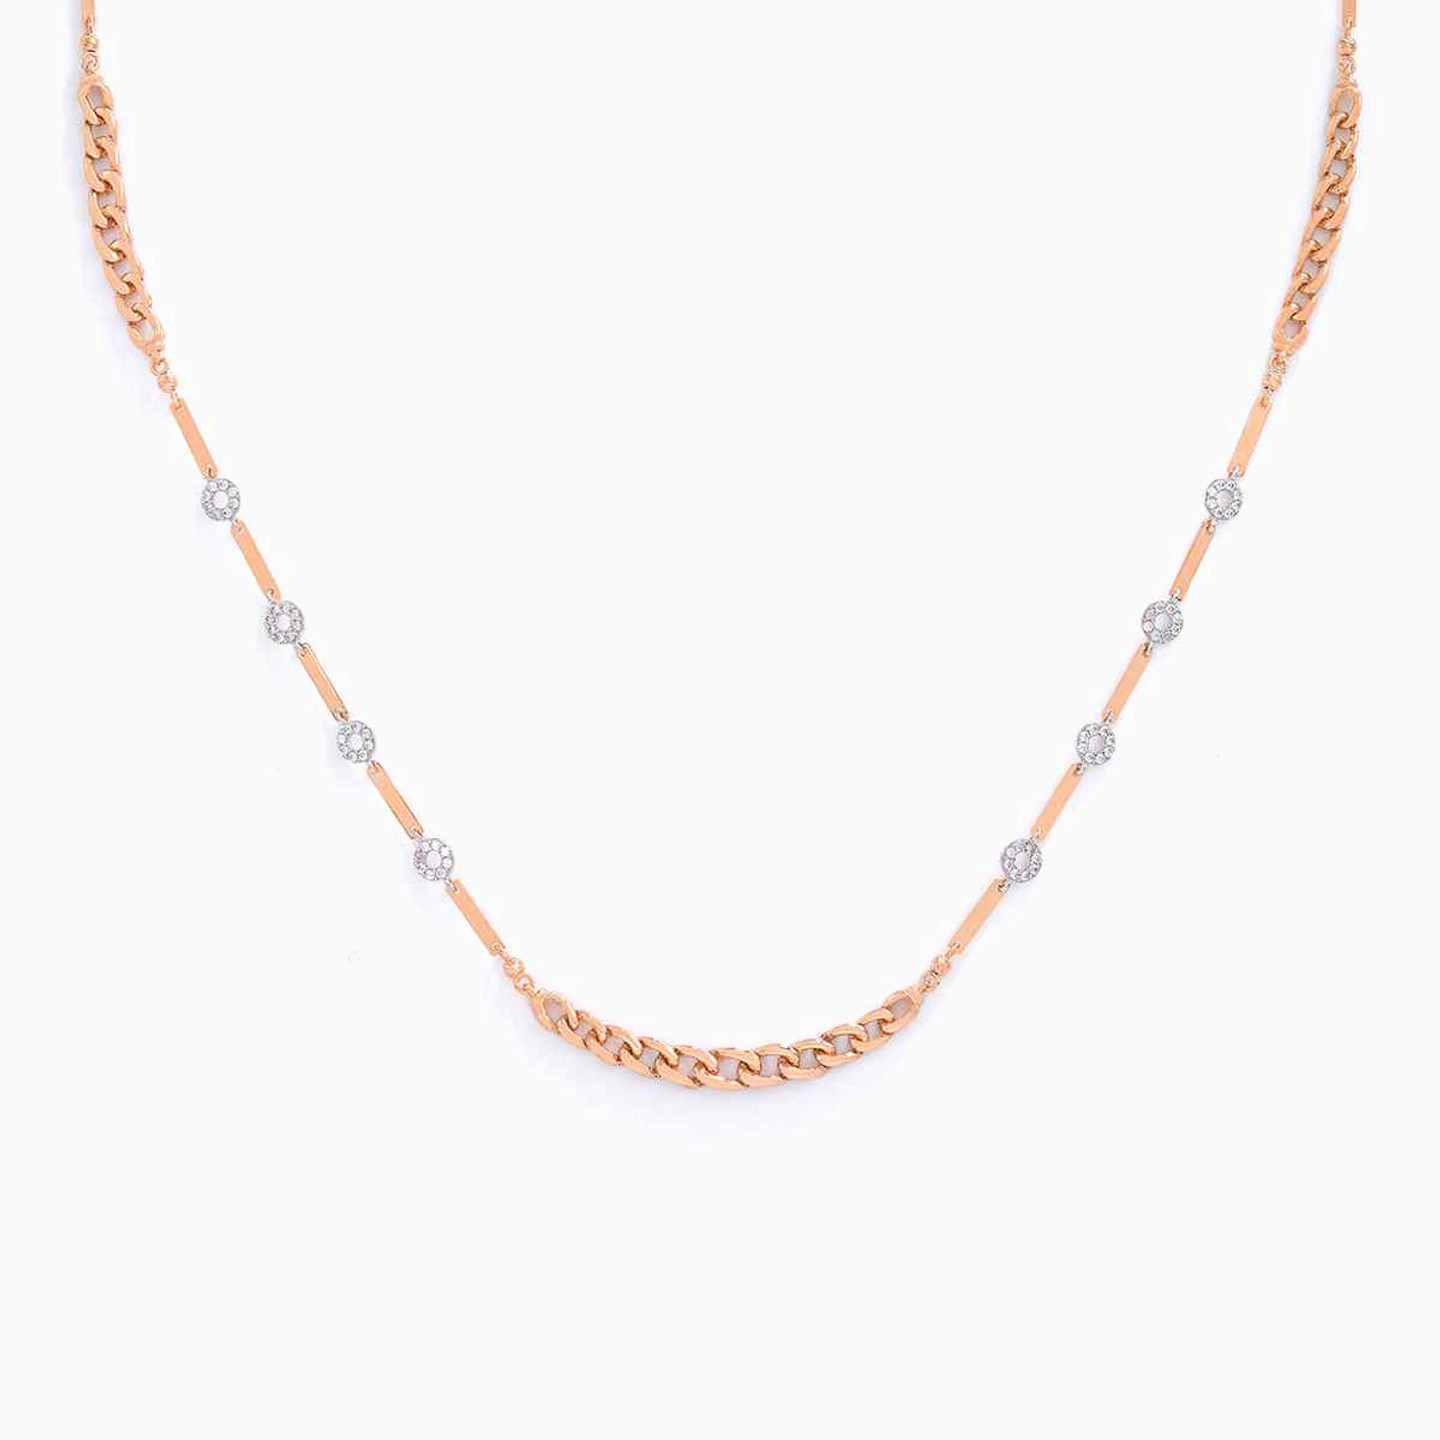 21K Gold Cubic Zirconia Chain Necklace - 2